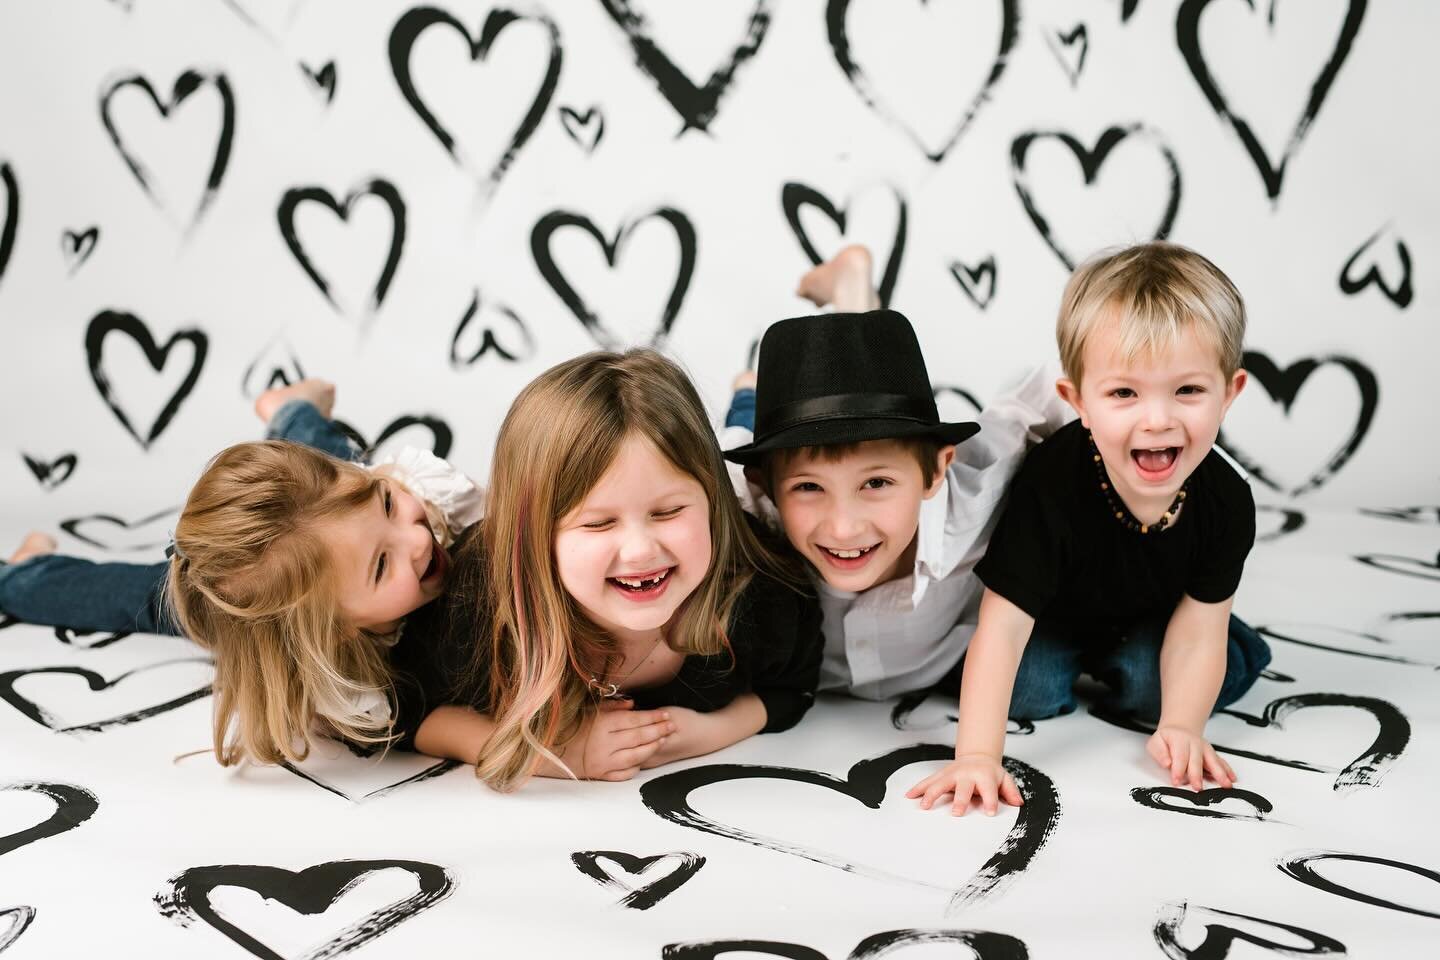 Happy love day from these little Valentine&rsquo;s cuties!

I wish I had had time this year to do these as mini sessions, but doing these for one of my besties and her kids was just as sweet and I loved getting to be a bit more creative in my studio!